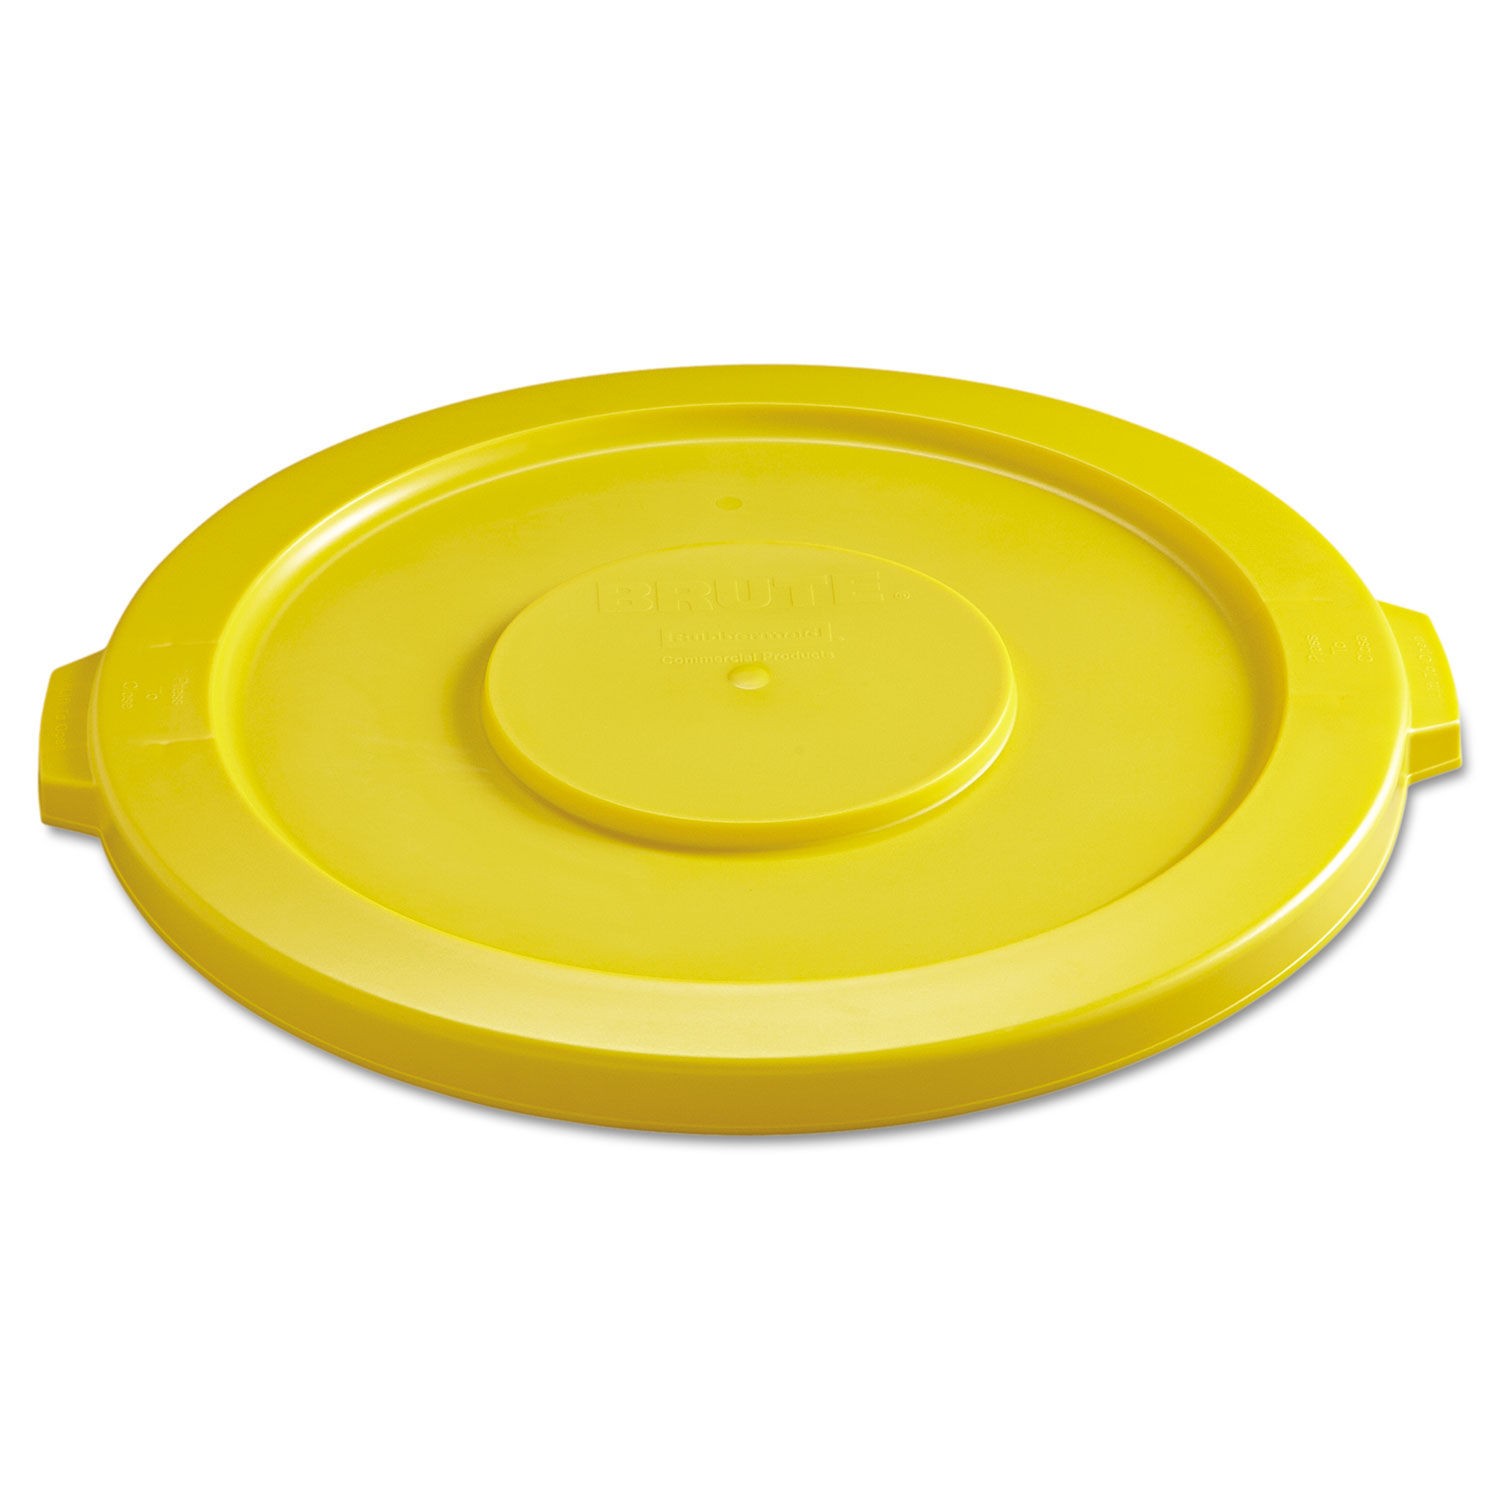 Round Flat Top Lid for 32 Gallon Brute Containers, Yellow